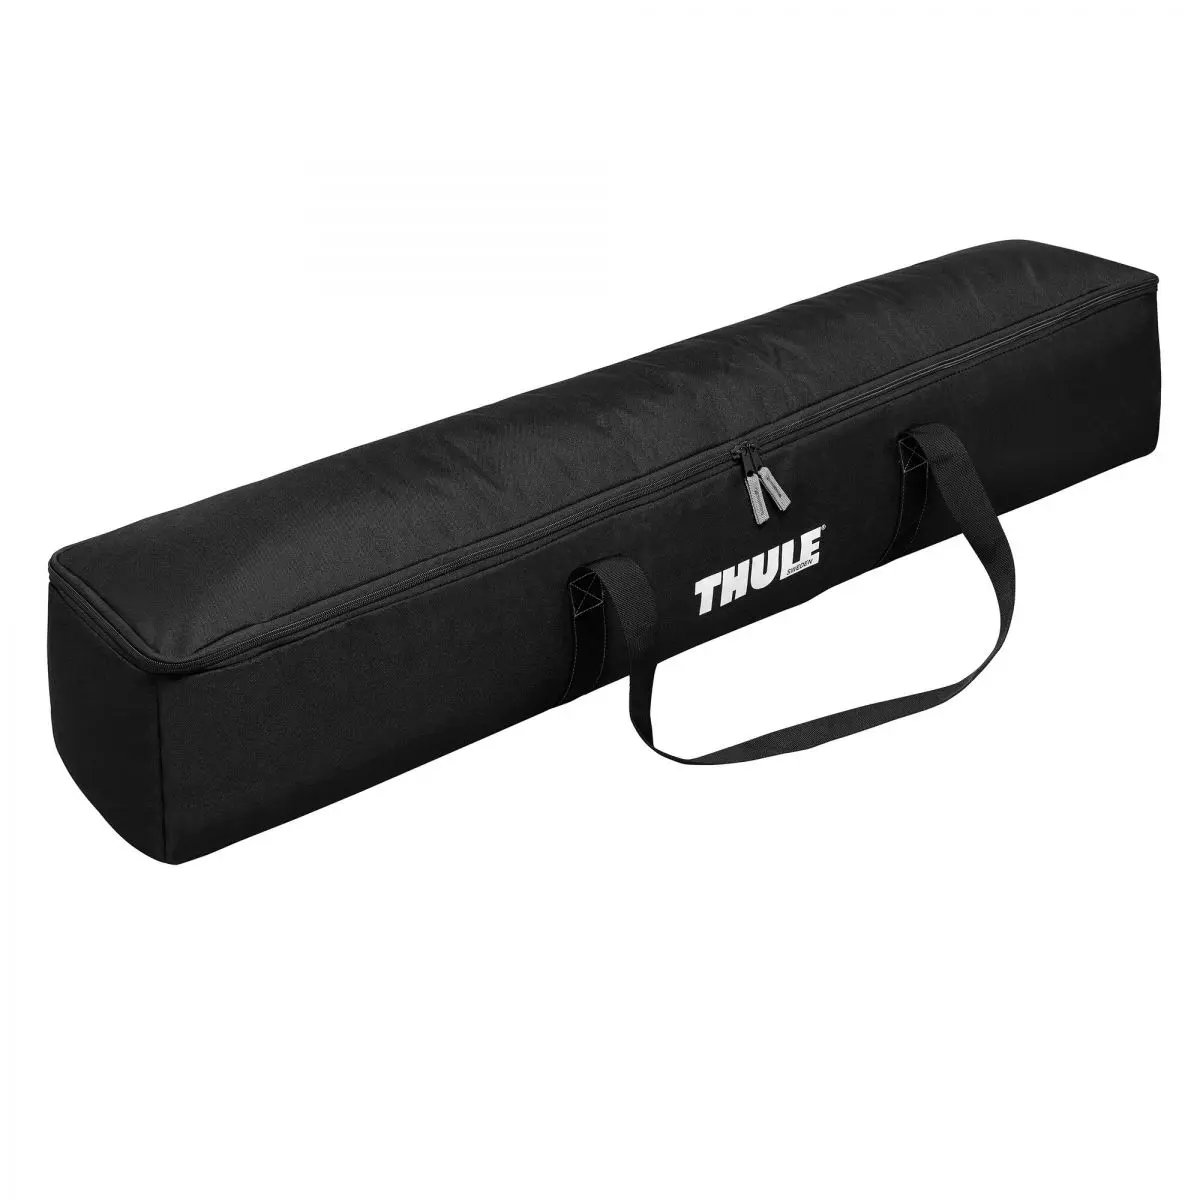 Thule Panorama pentru TO 9200, lungime 5,5 m, inaltime L